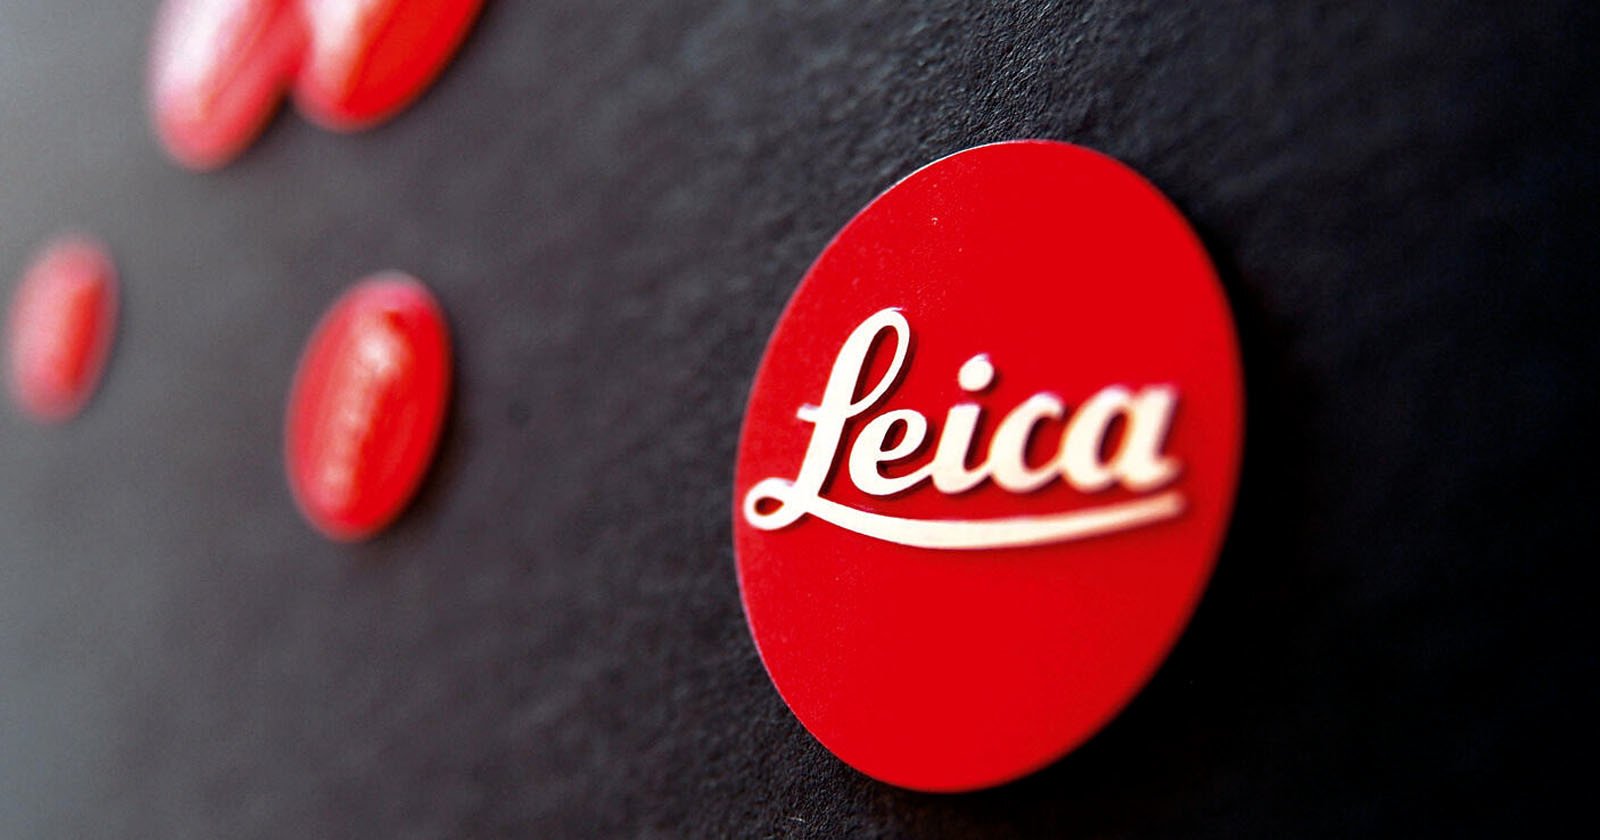  2021 was leica best financial year ever 